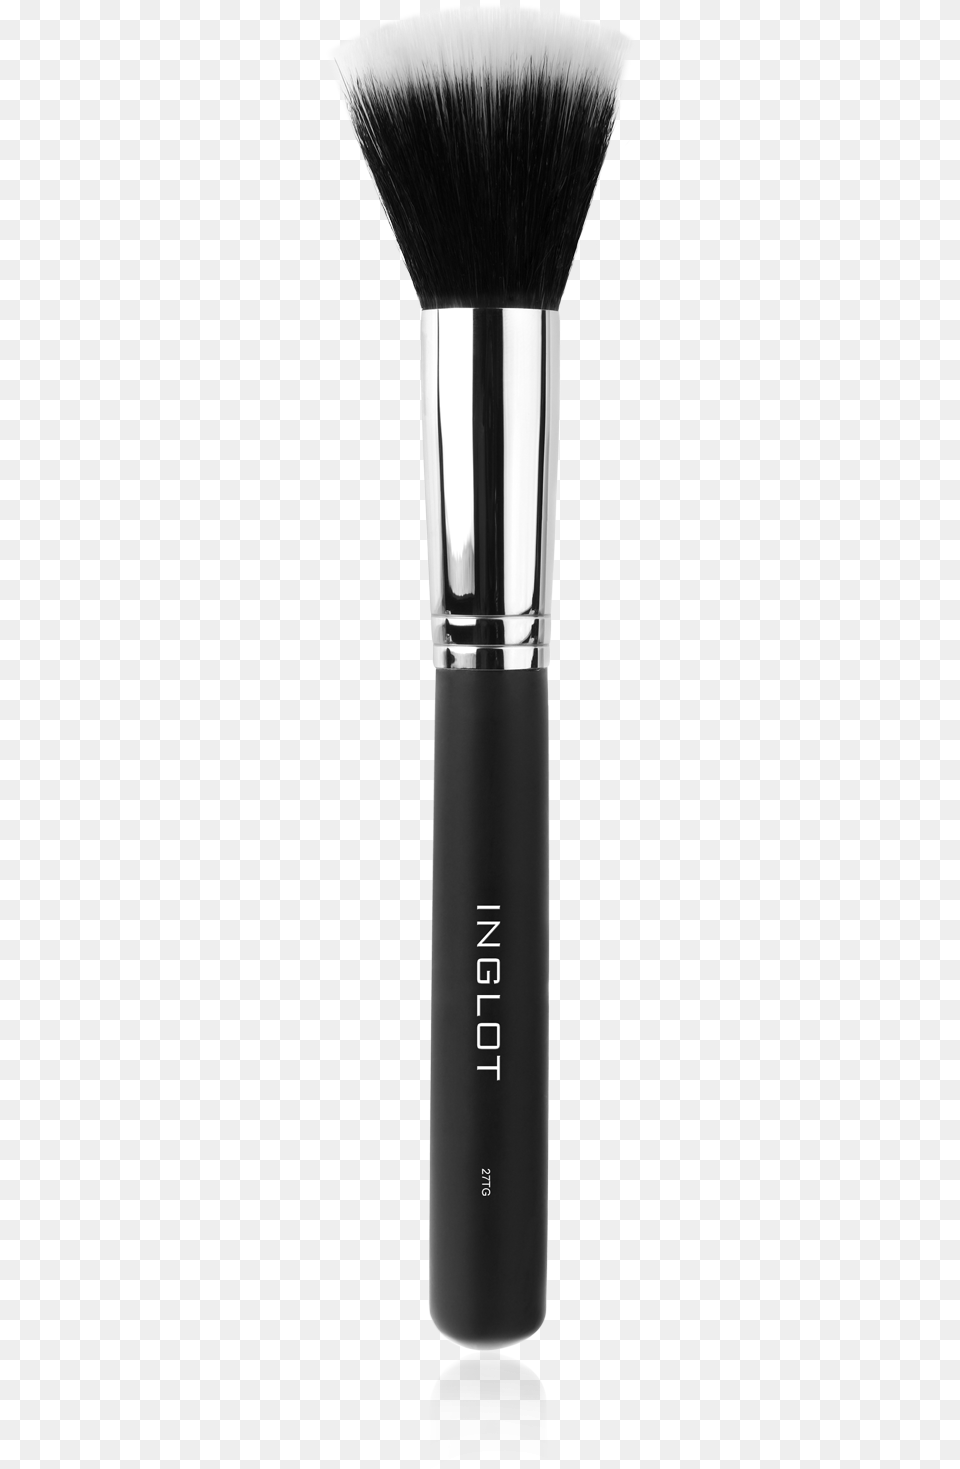 Makeup Brush One Make Up Brush, Device, Tool Png